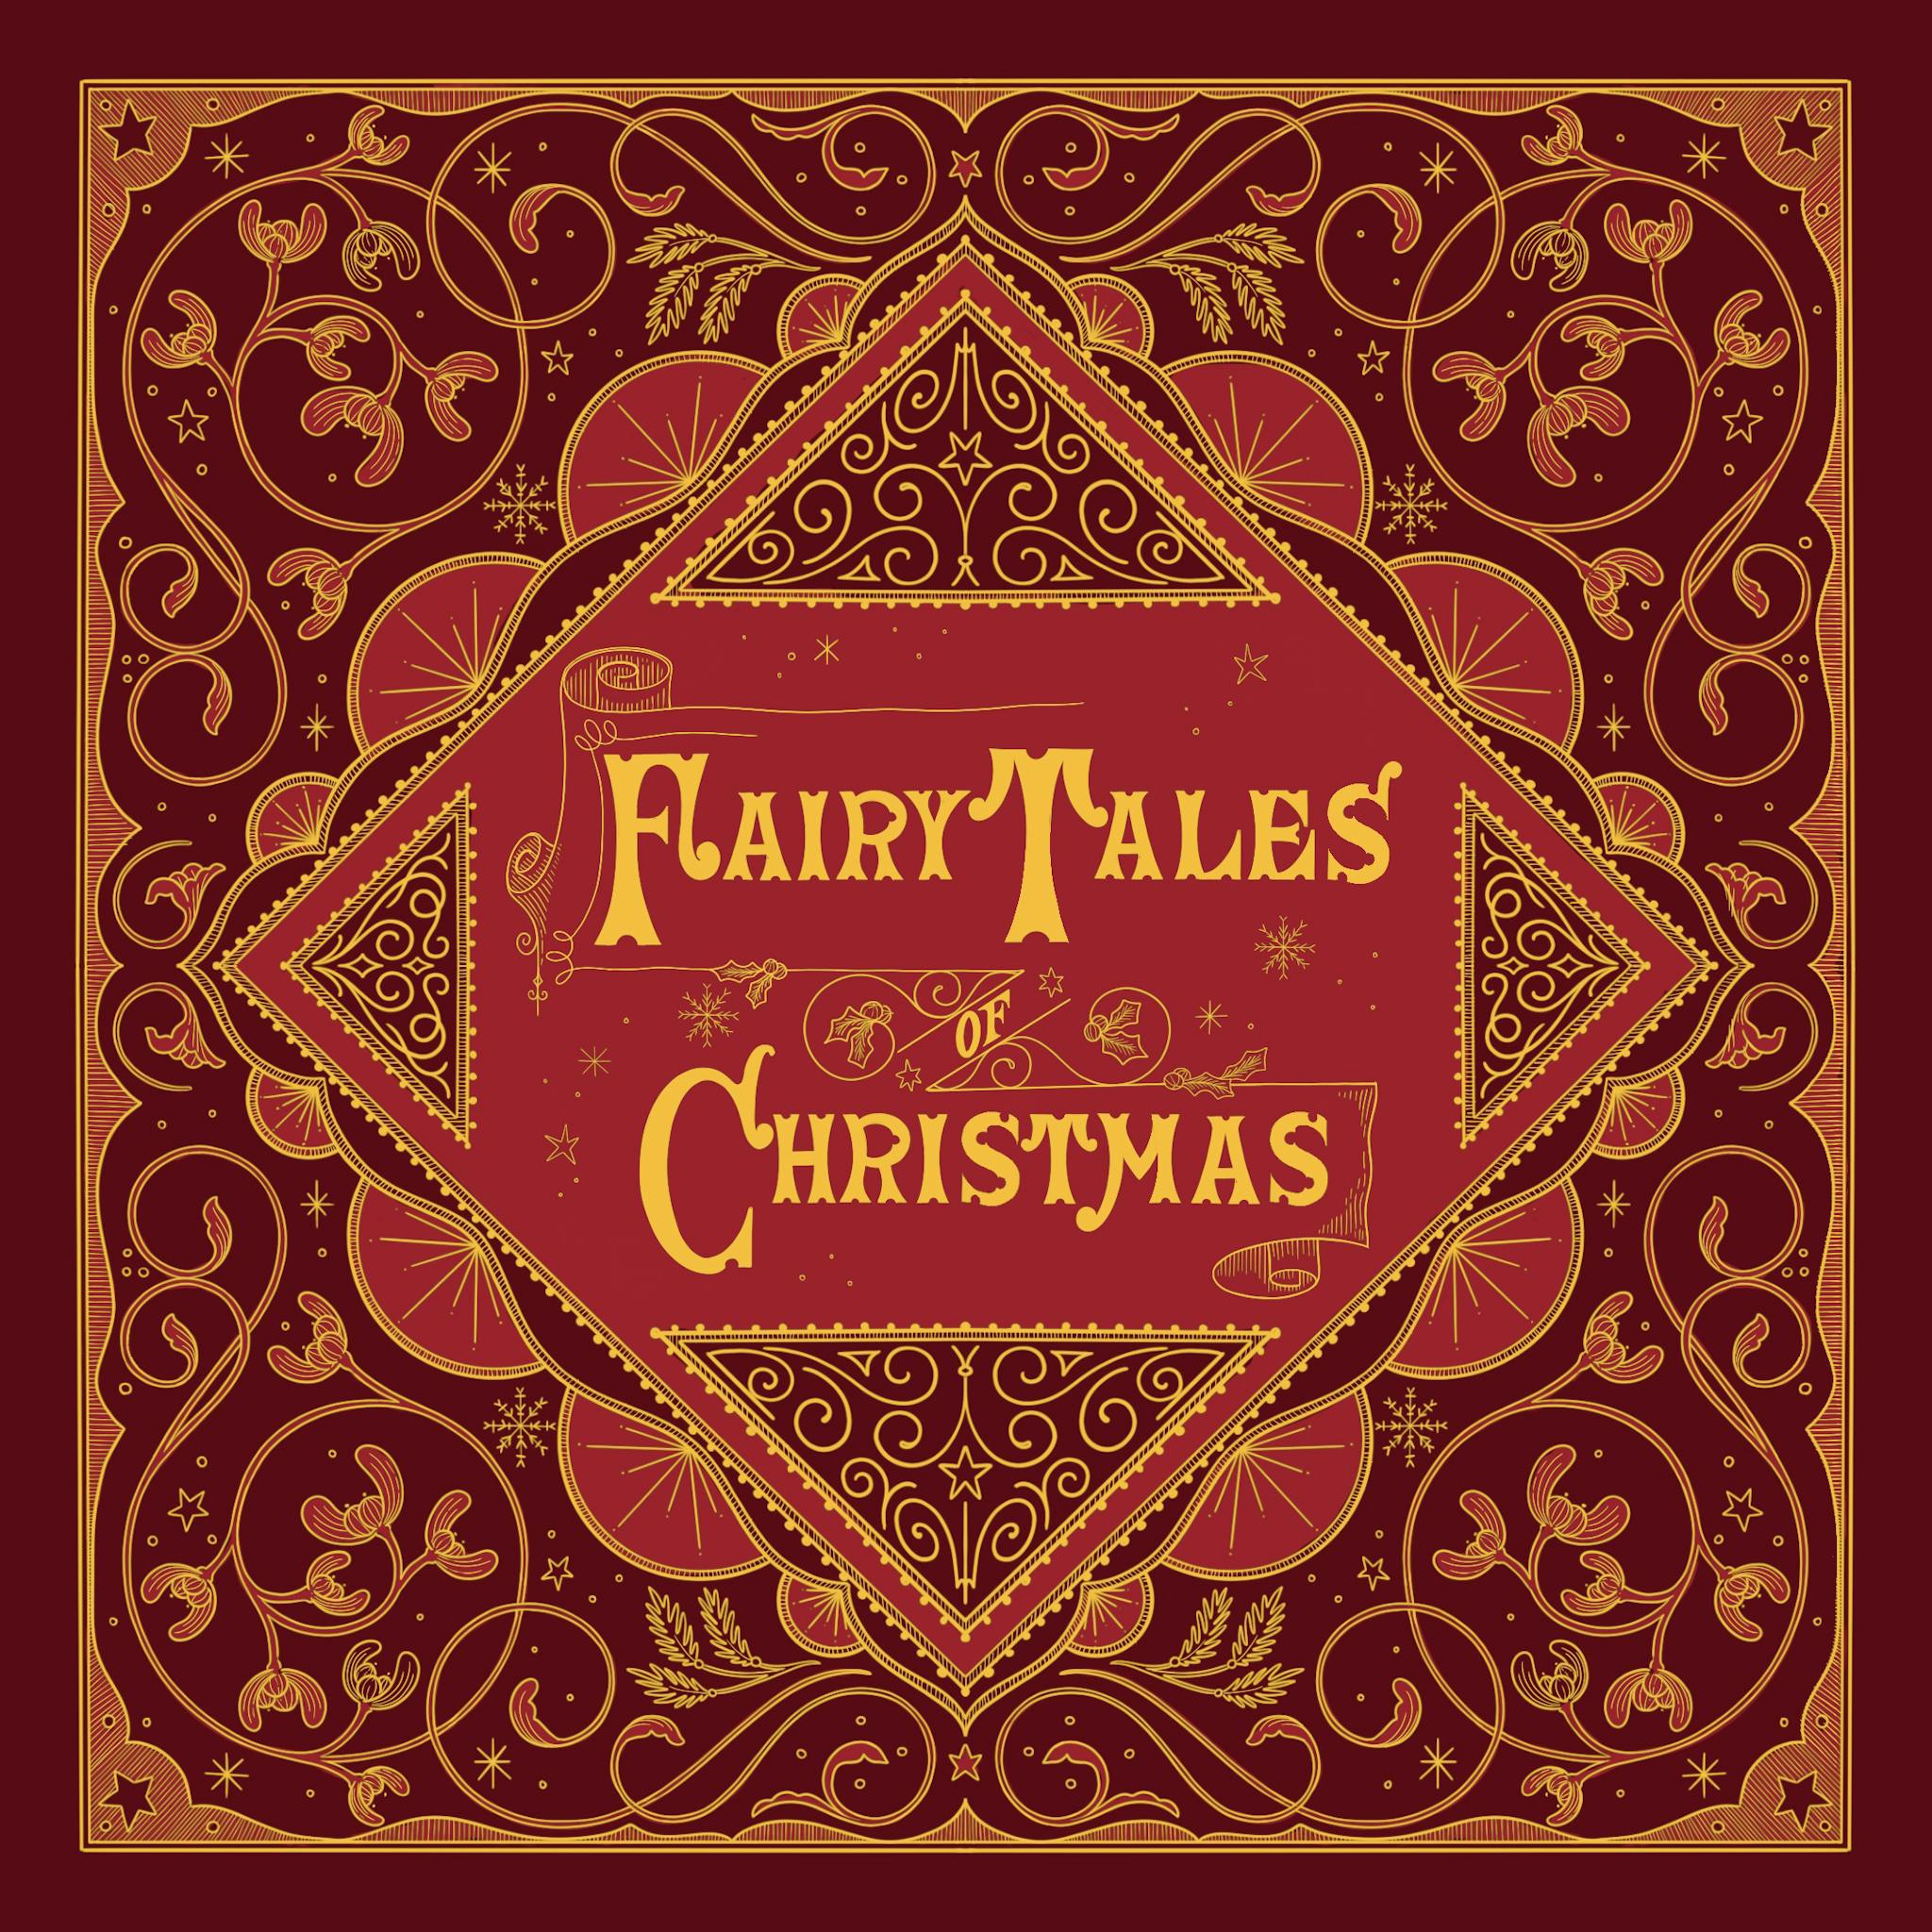 Sketch of the fairy tales of christmas box cover